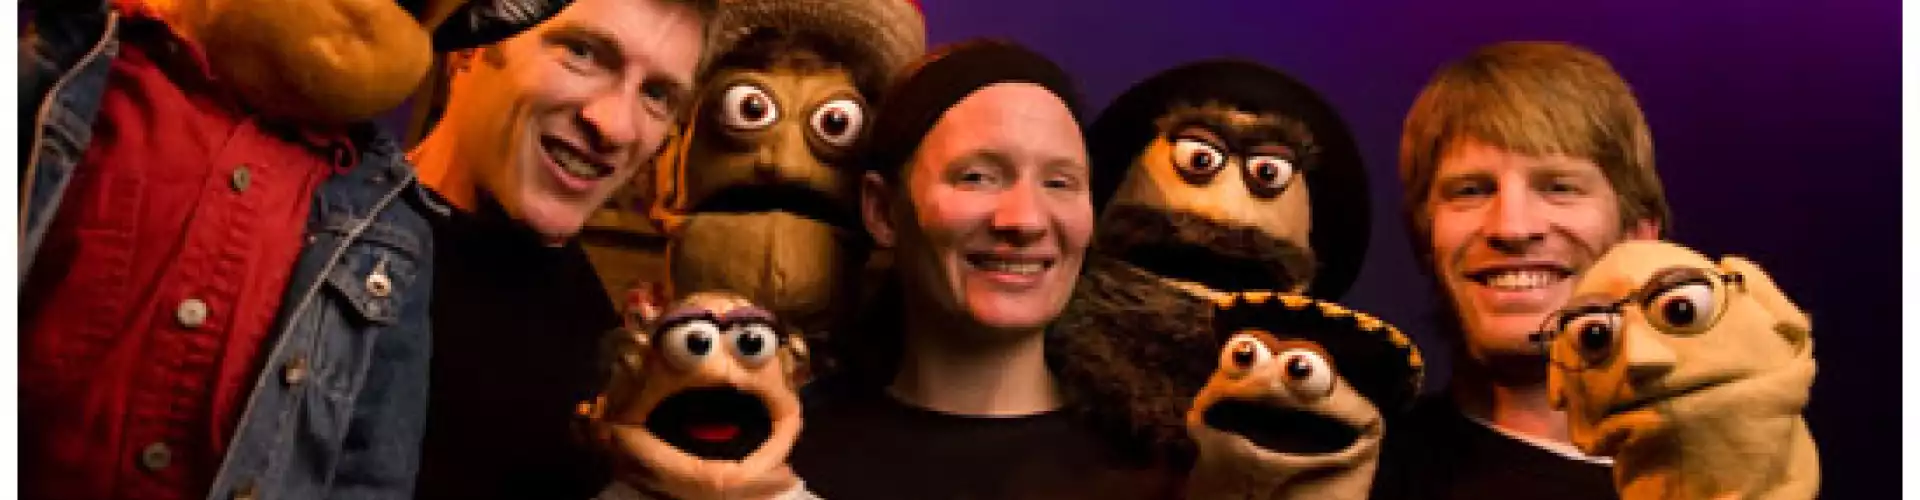 Q & A with Frogtown Mountain Puppeteers of Bar Harbor, ME 